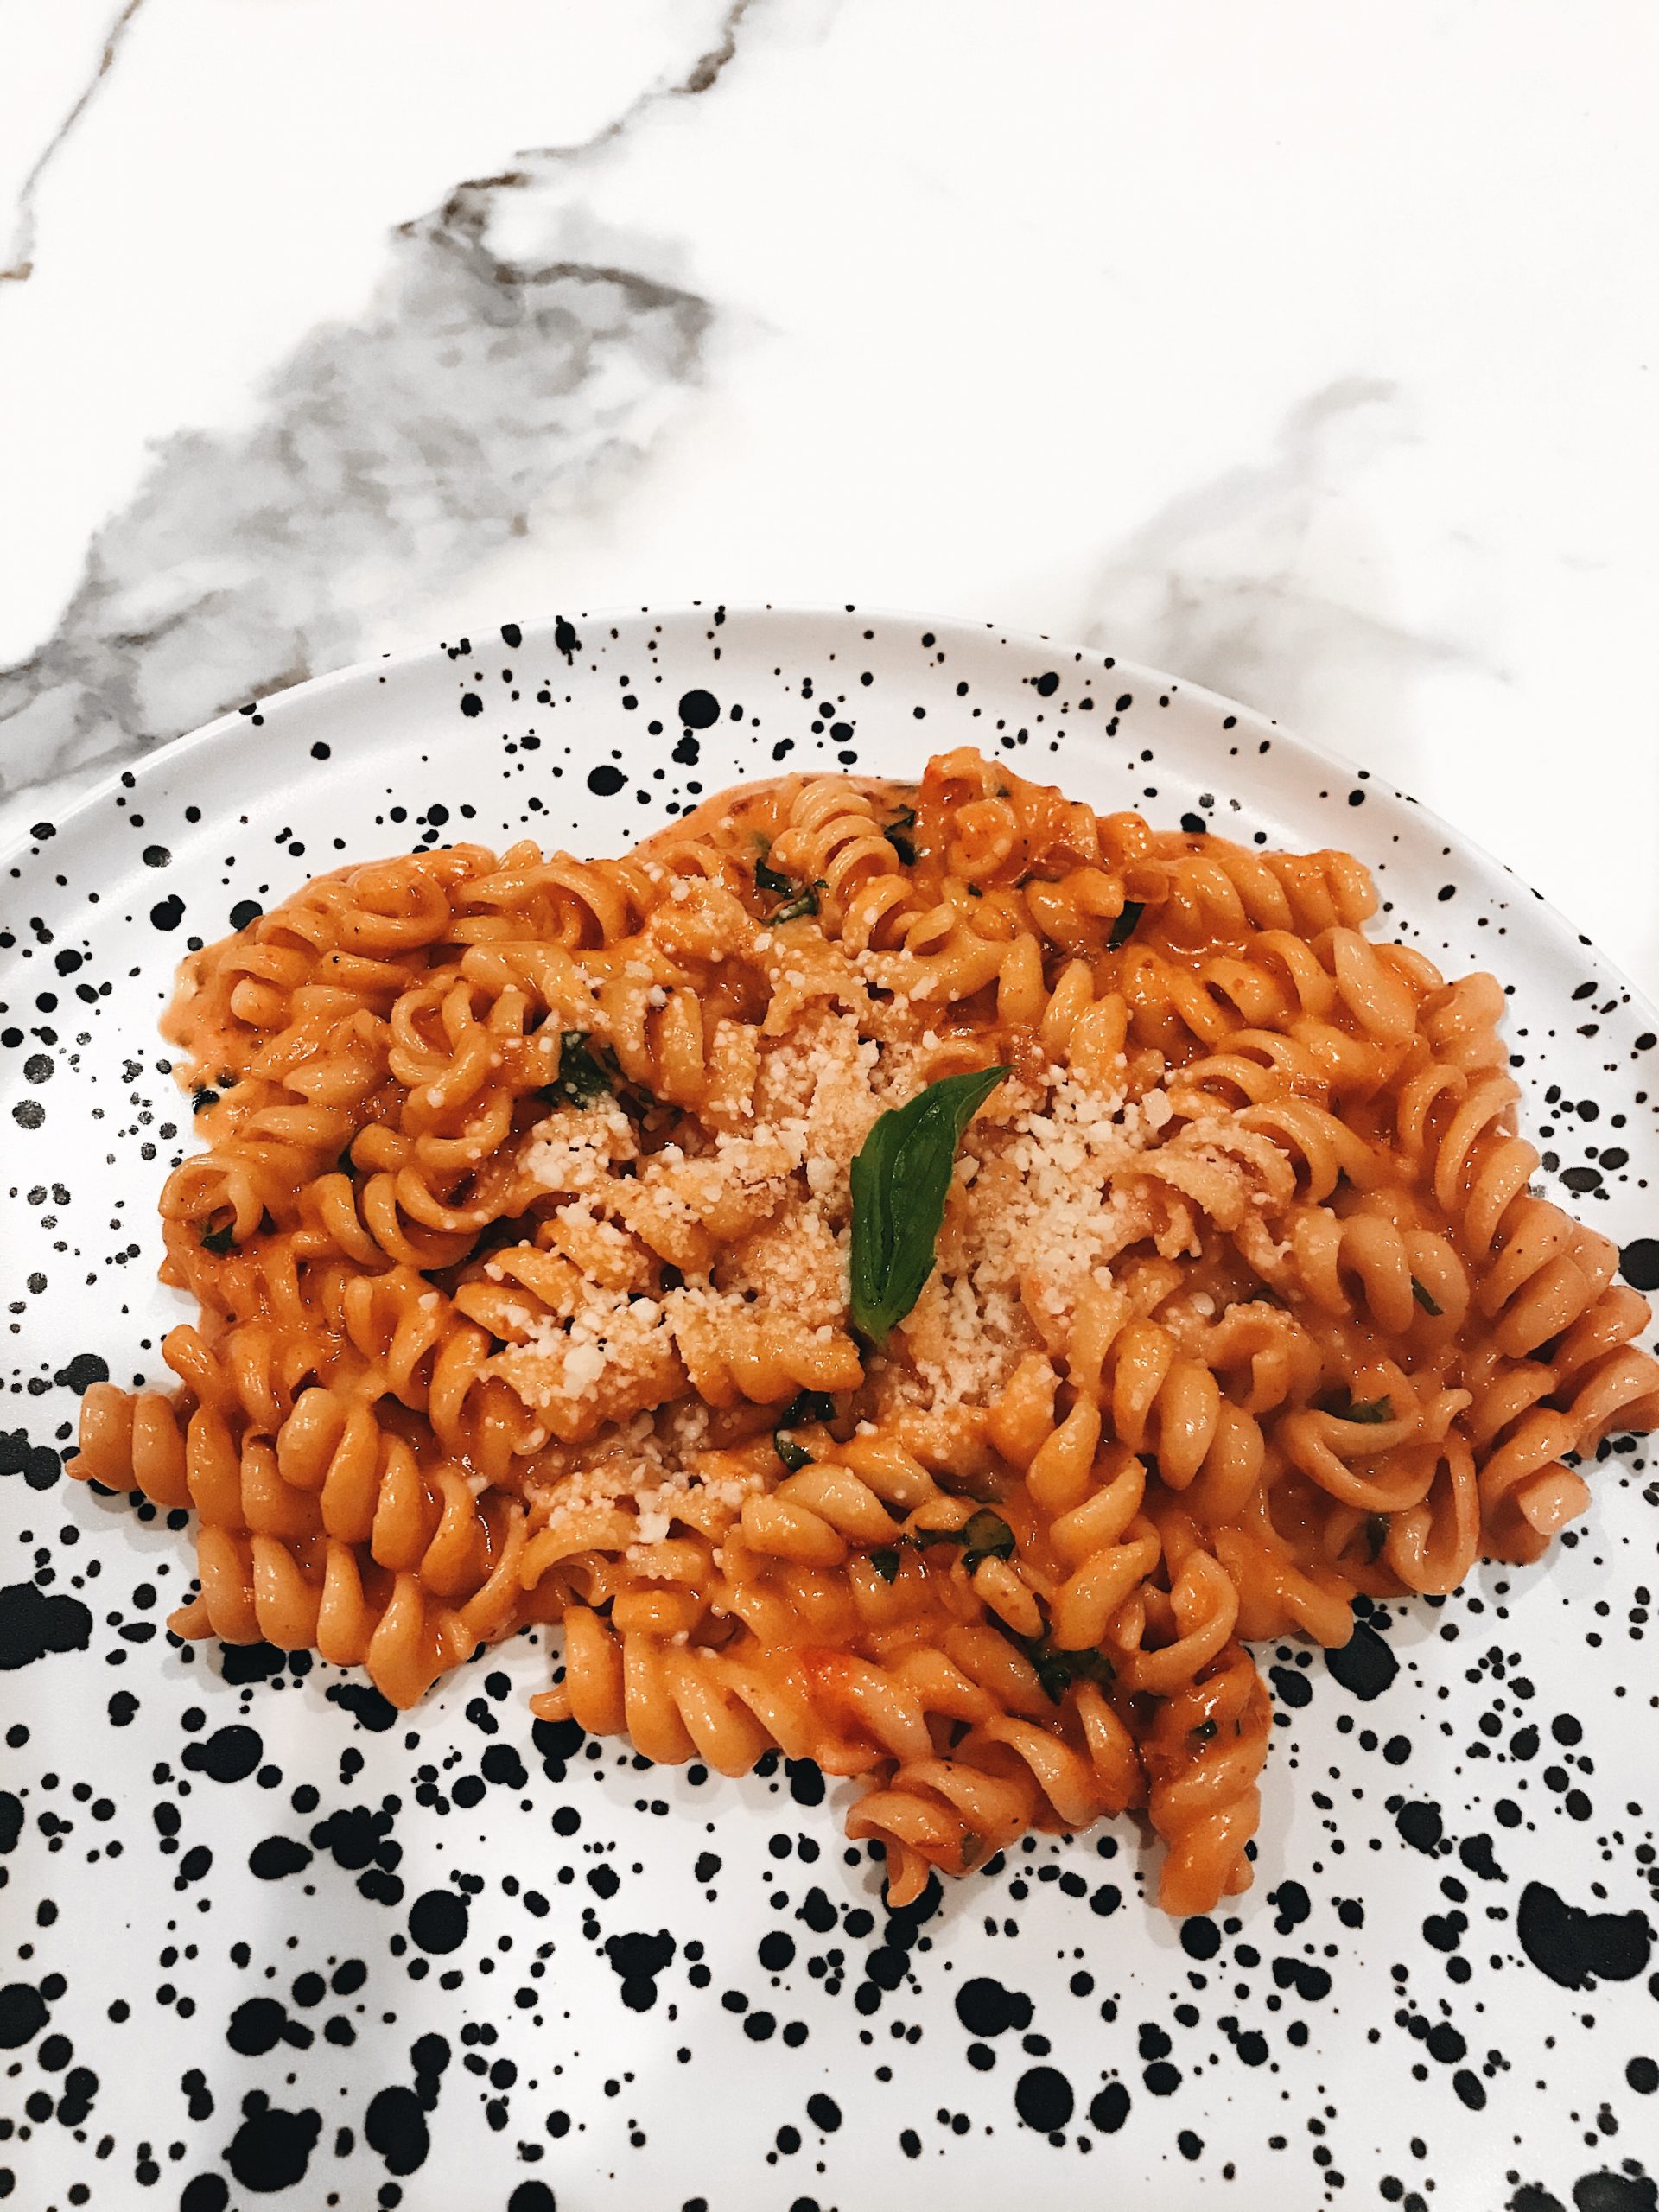 Jon and Vinnys Spicy Fusilli with Vodka Sauce Basil and Parmesan Copycat Recipe scaled